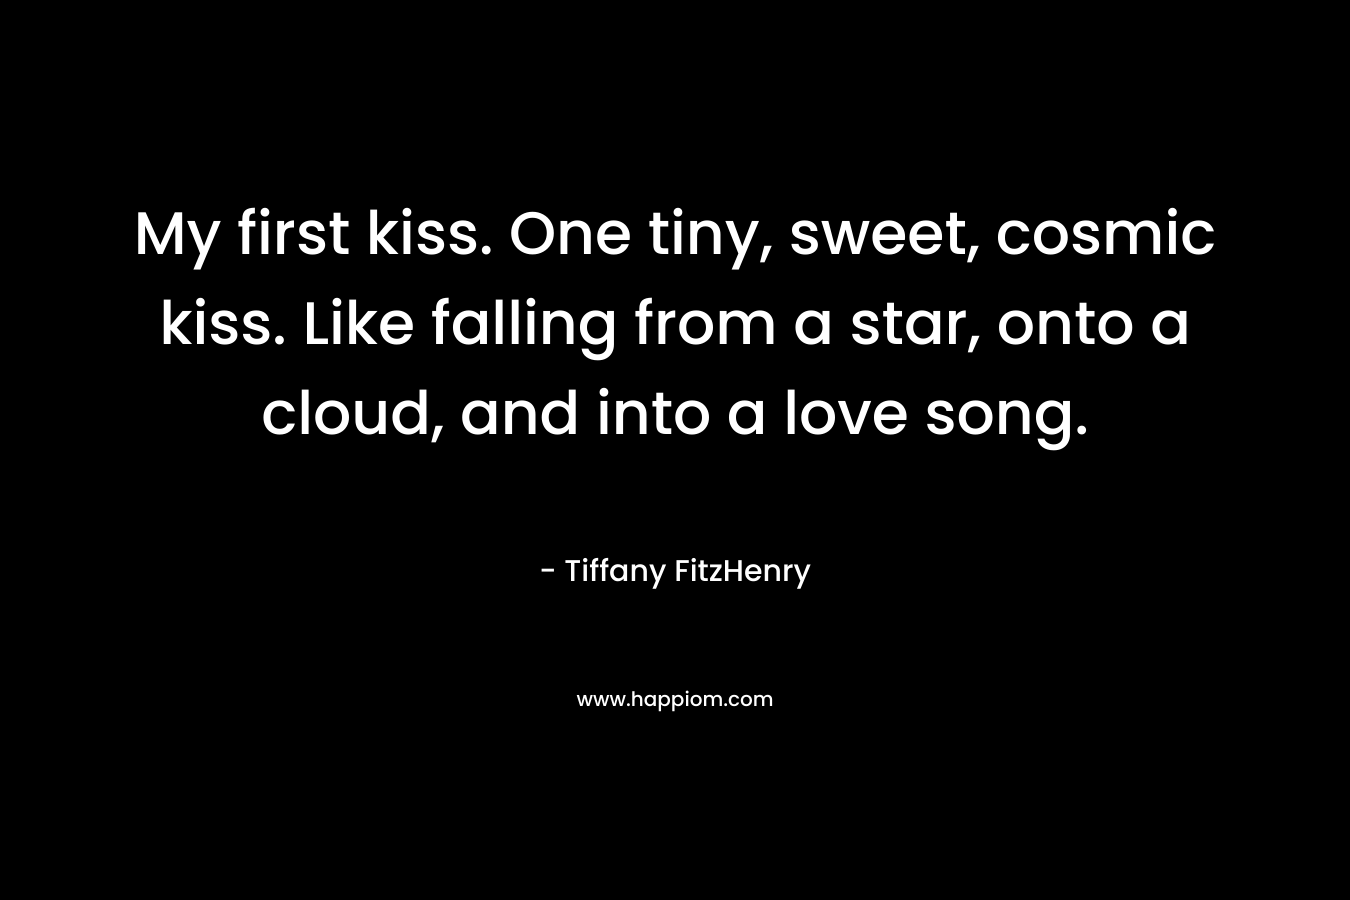 My first kiss. One tiny, sweet, cosmic kiss. Like falling from a star, onto a cloud, and into a love song. – Tiffany FitzHenry